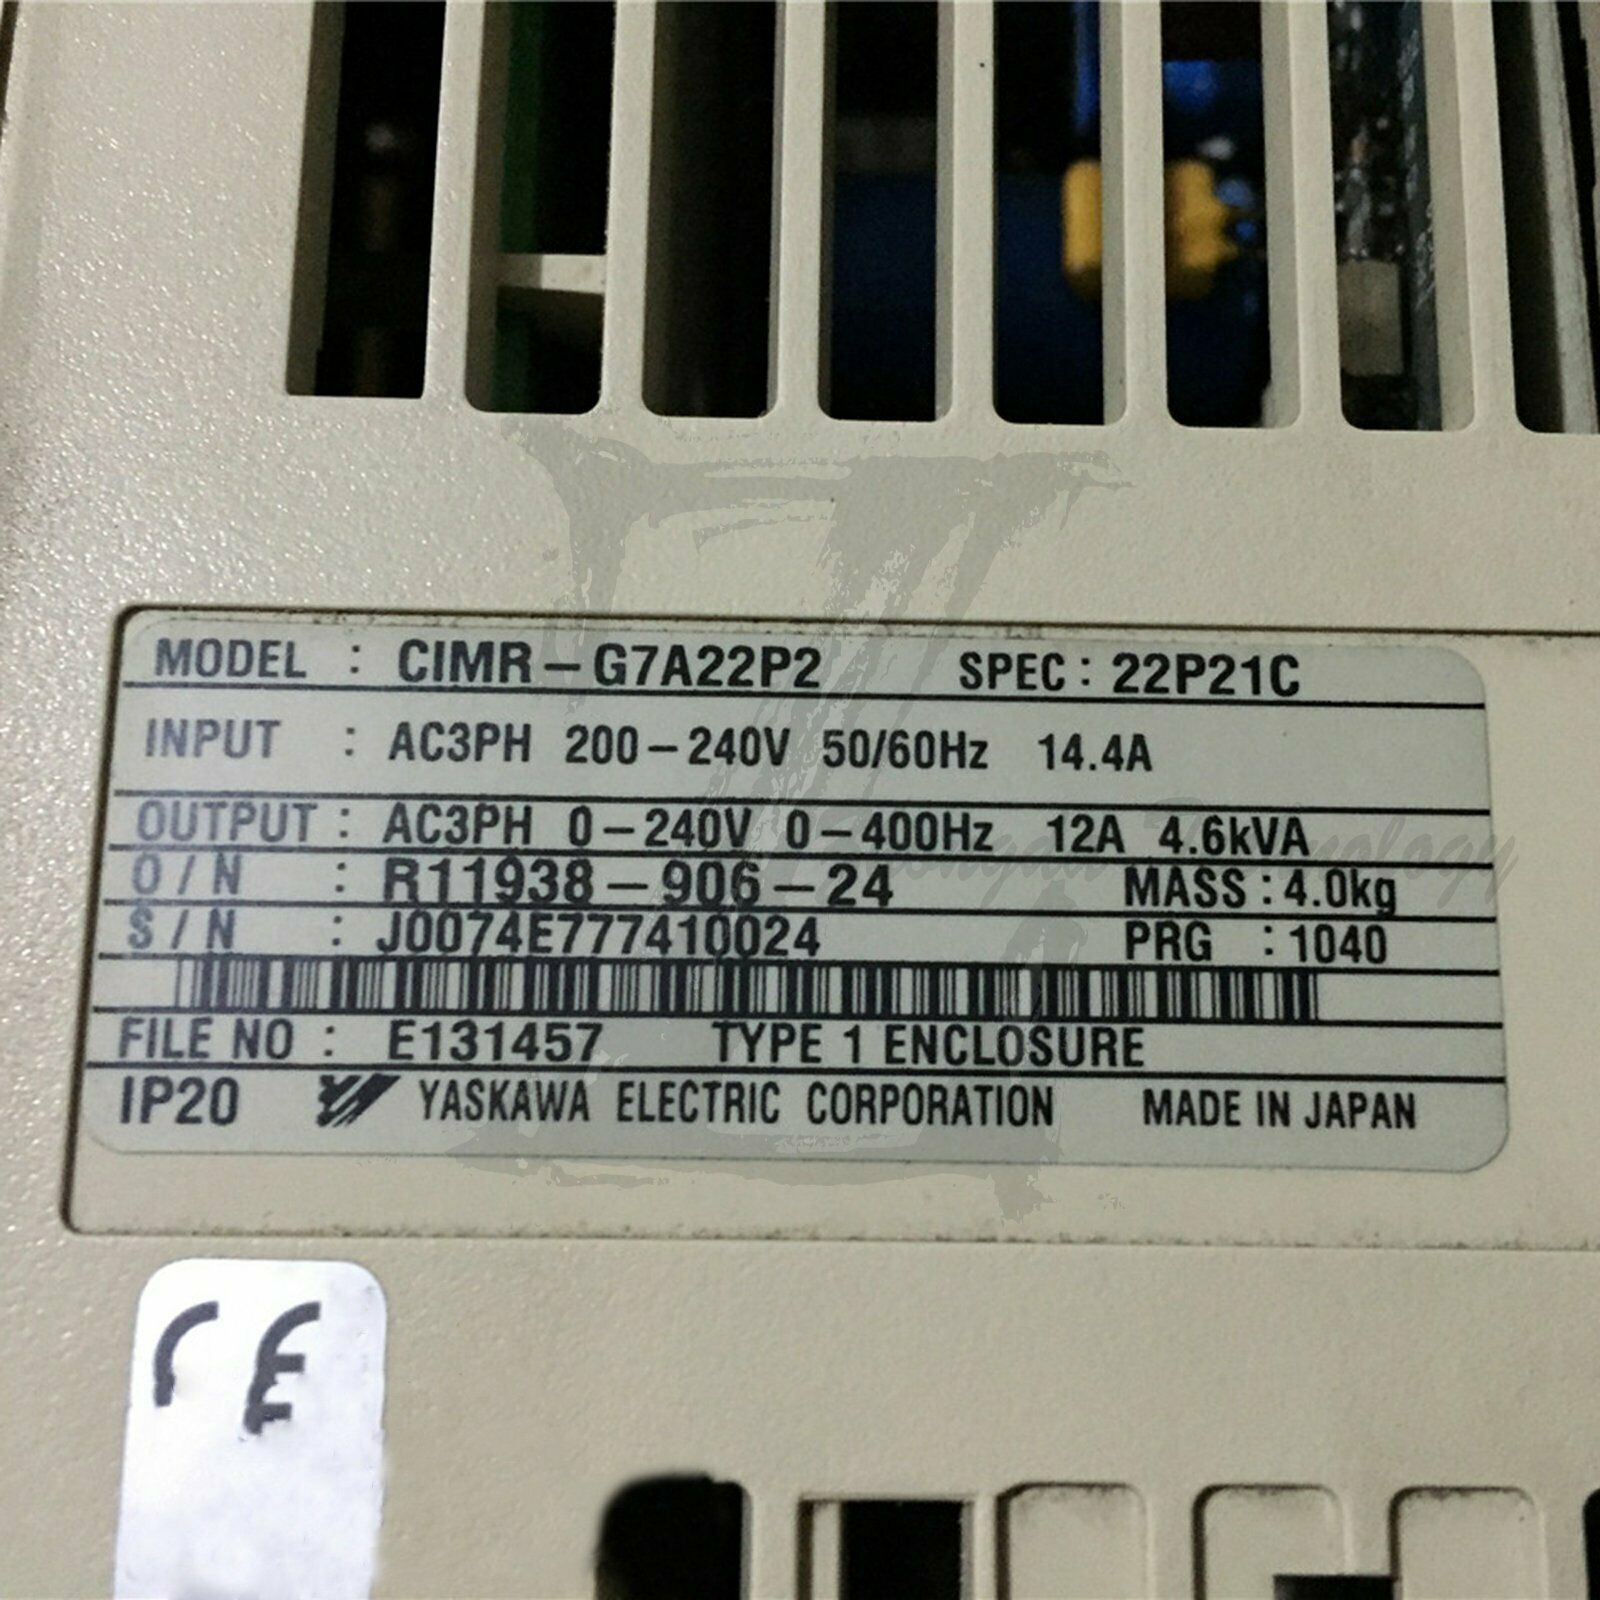 1PC Used Yasukawa frequency converter CIMR-G7A22P2 Tested In Good Condition KOEED 500+, 70%, import_2020_10_10_031751, Other, Yaskawa